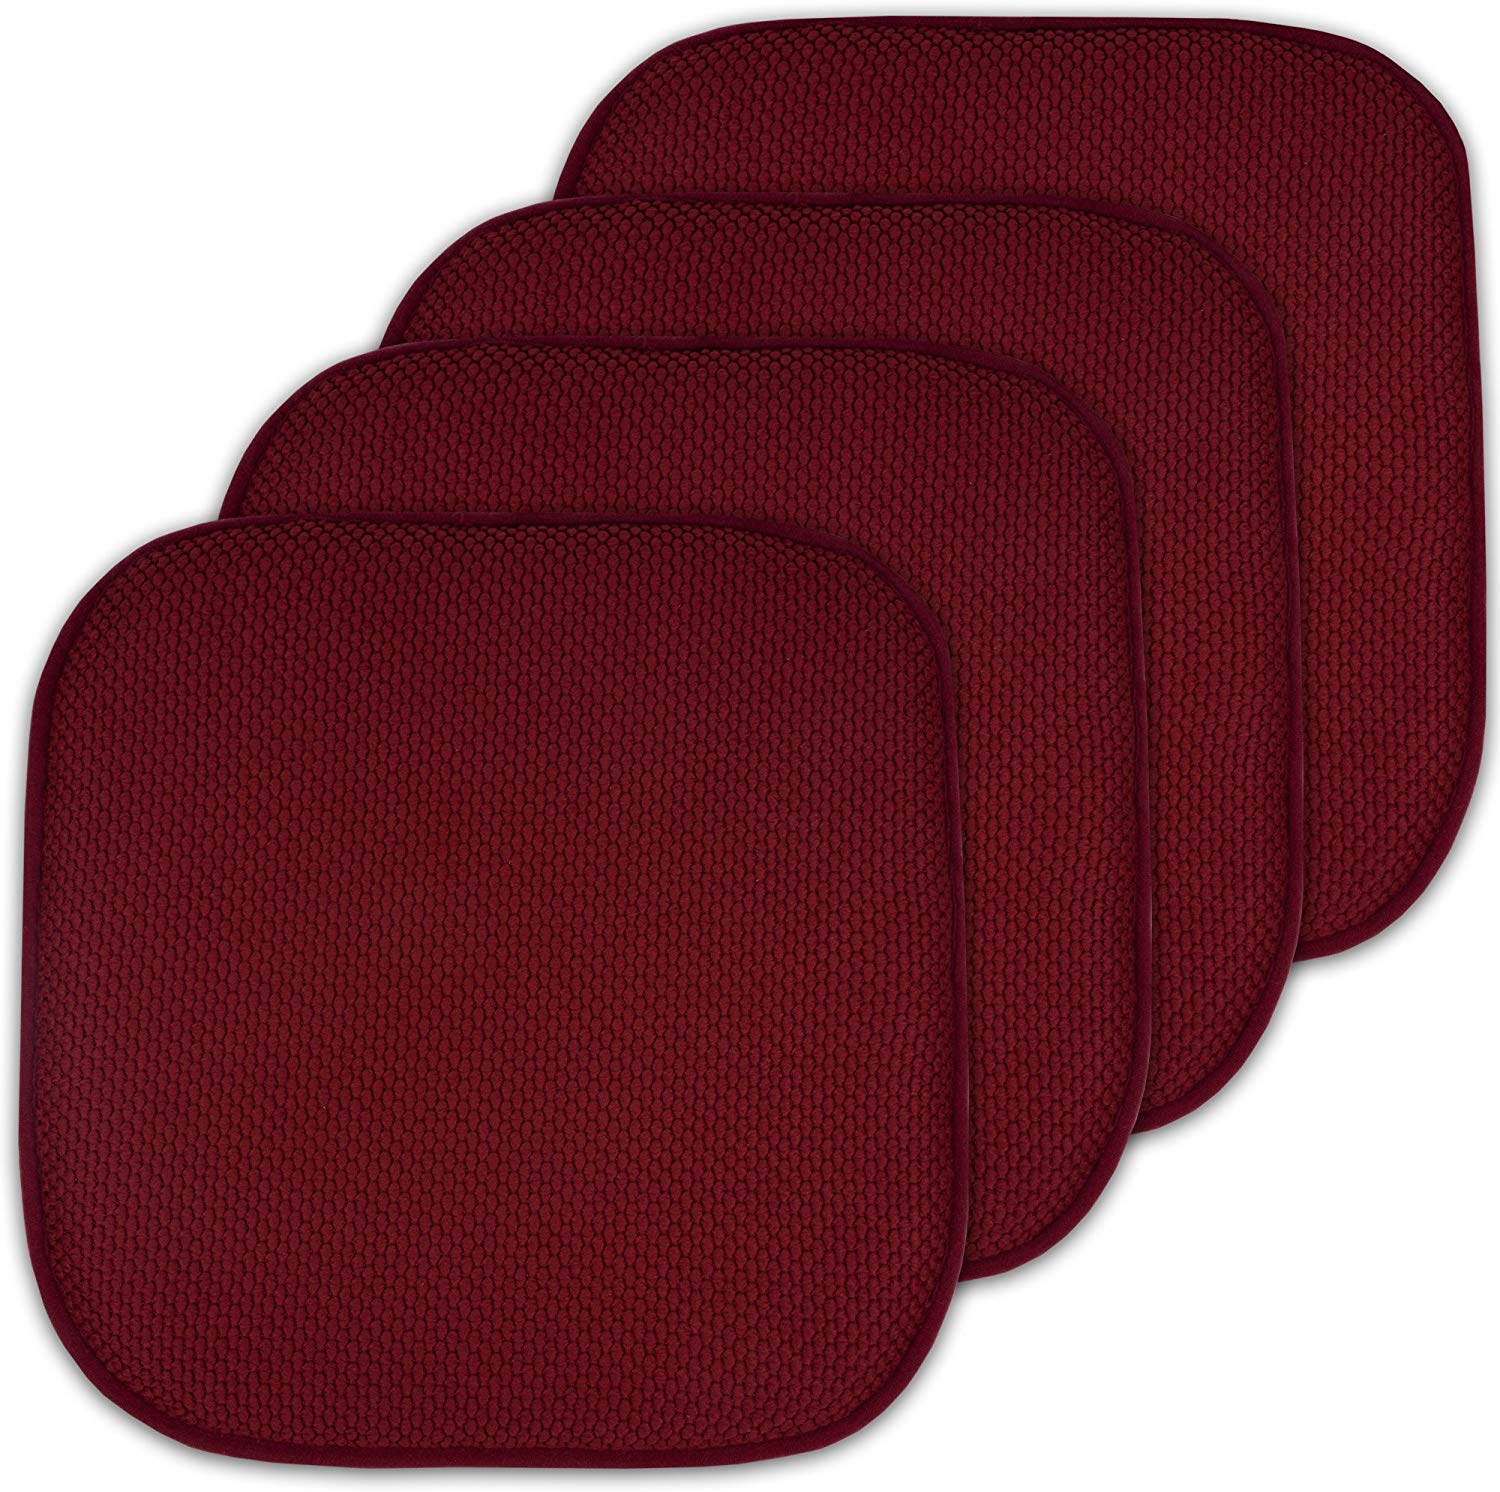 https://www.dontwasteyourmoney.com/wp-content/uploads/2020/02/sweet-home-collection-memory-foam-non-slip-cushion-non-slip-chair-pad.jpg